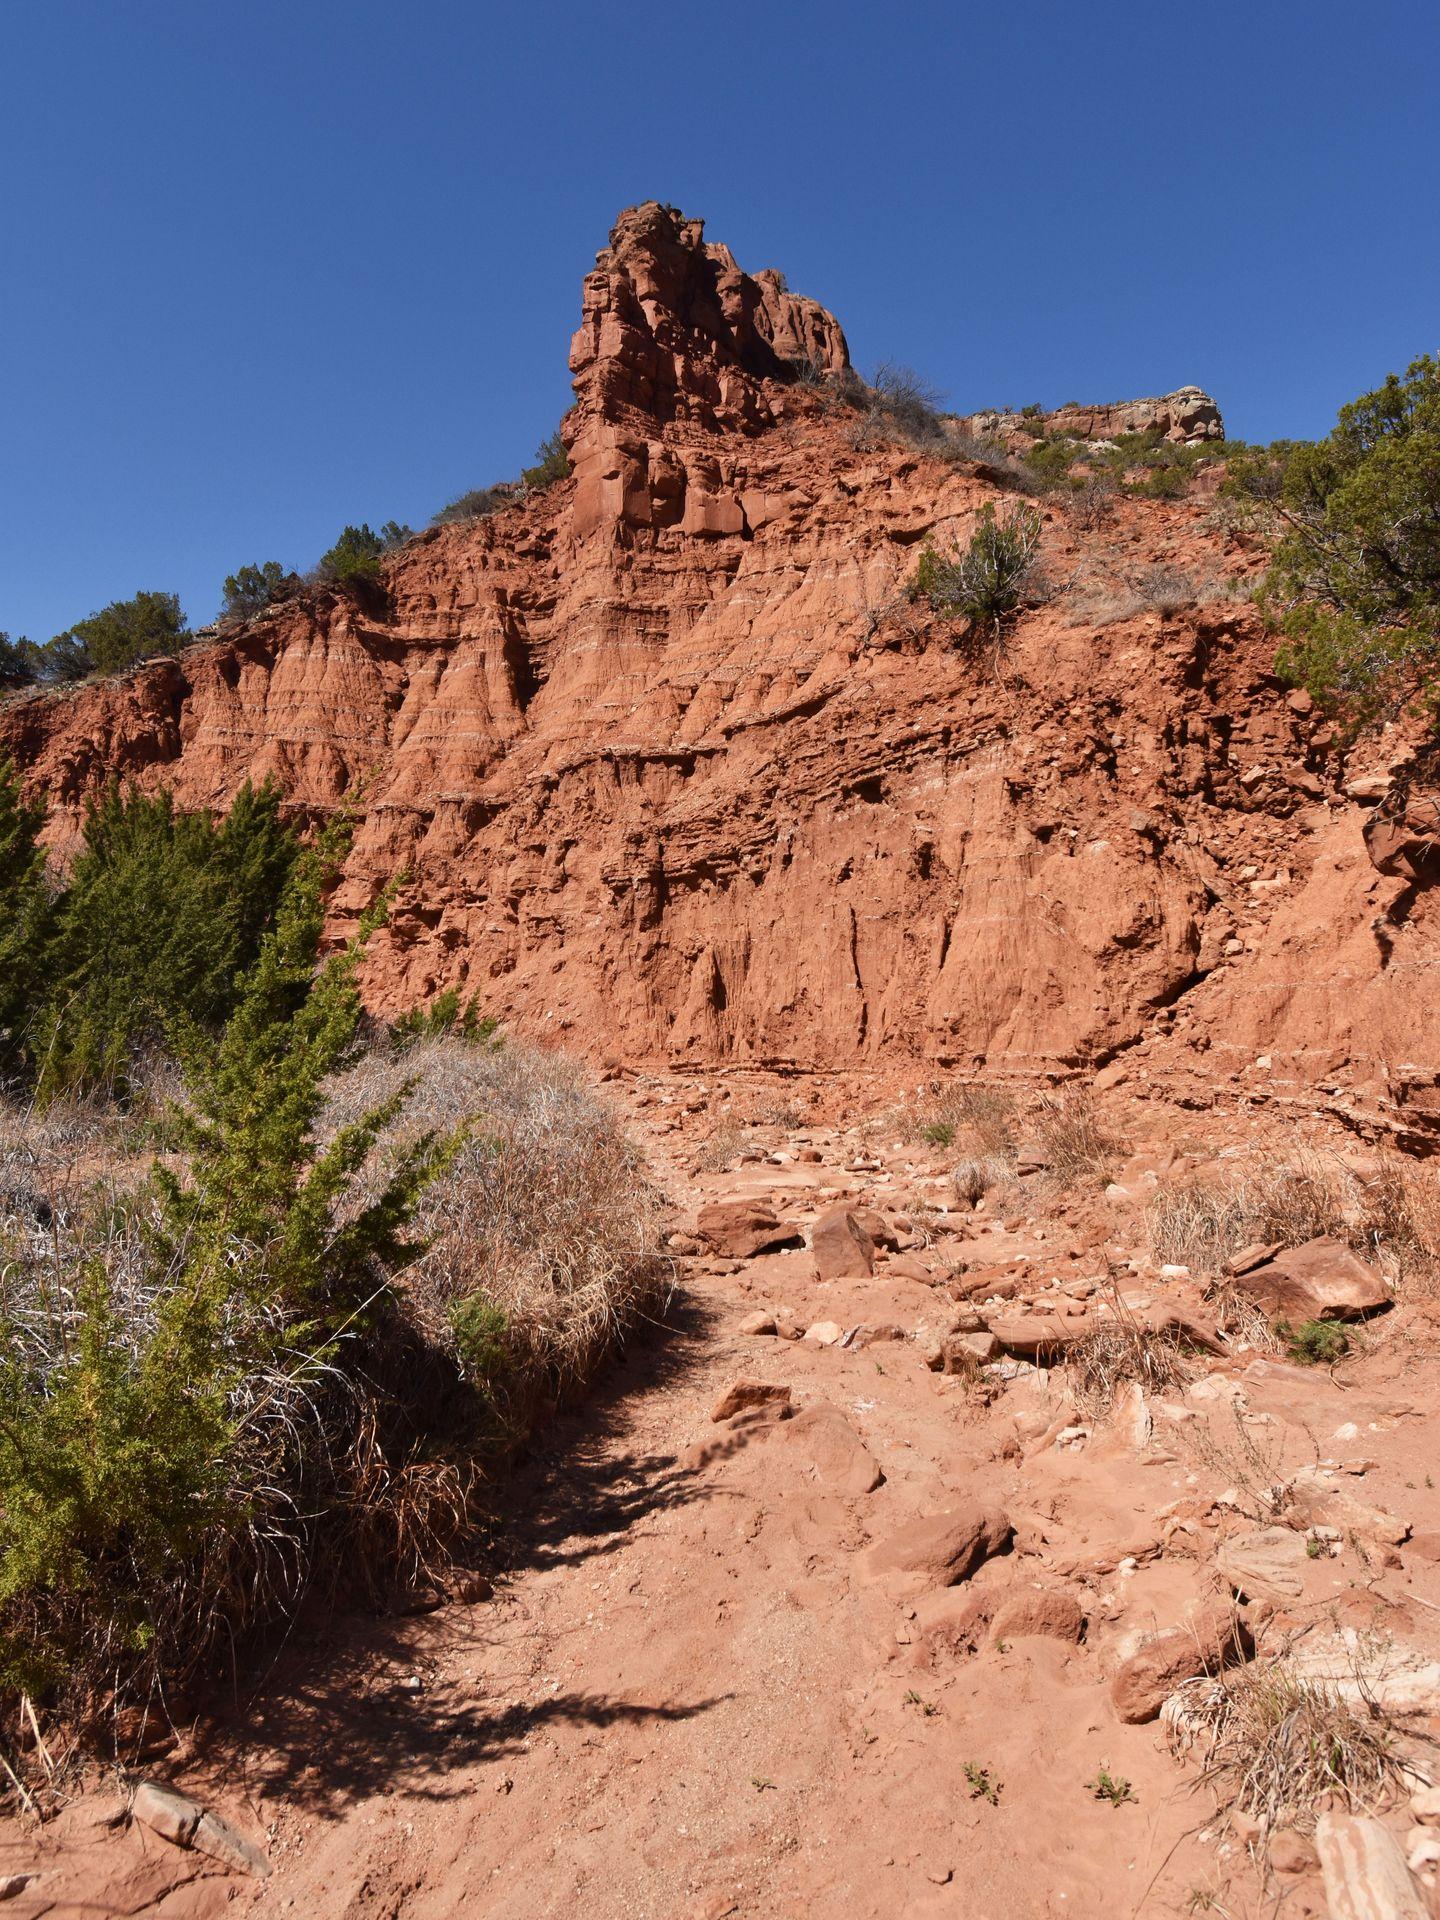 An orange rock formation that resembles a castle on the Upper North Prong trail.